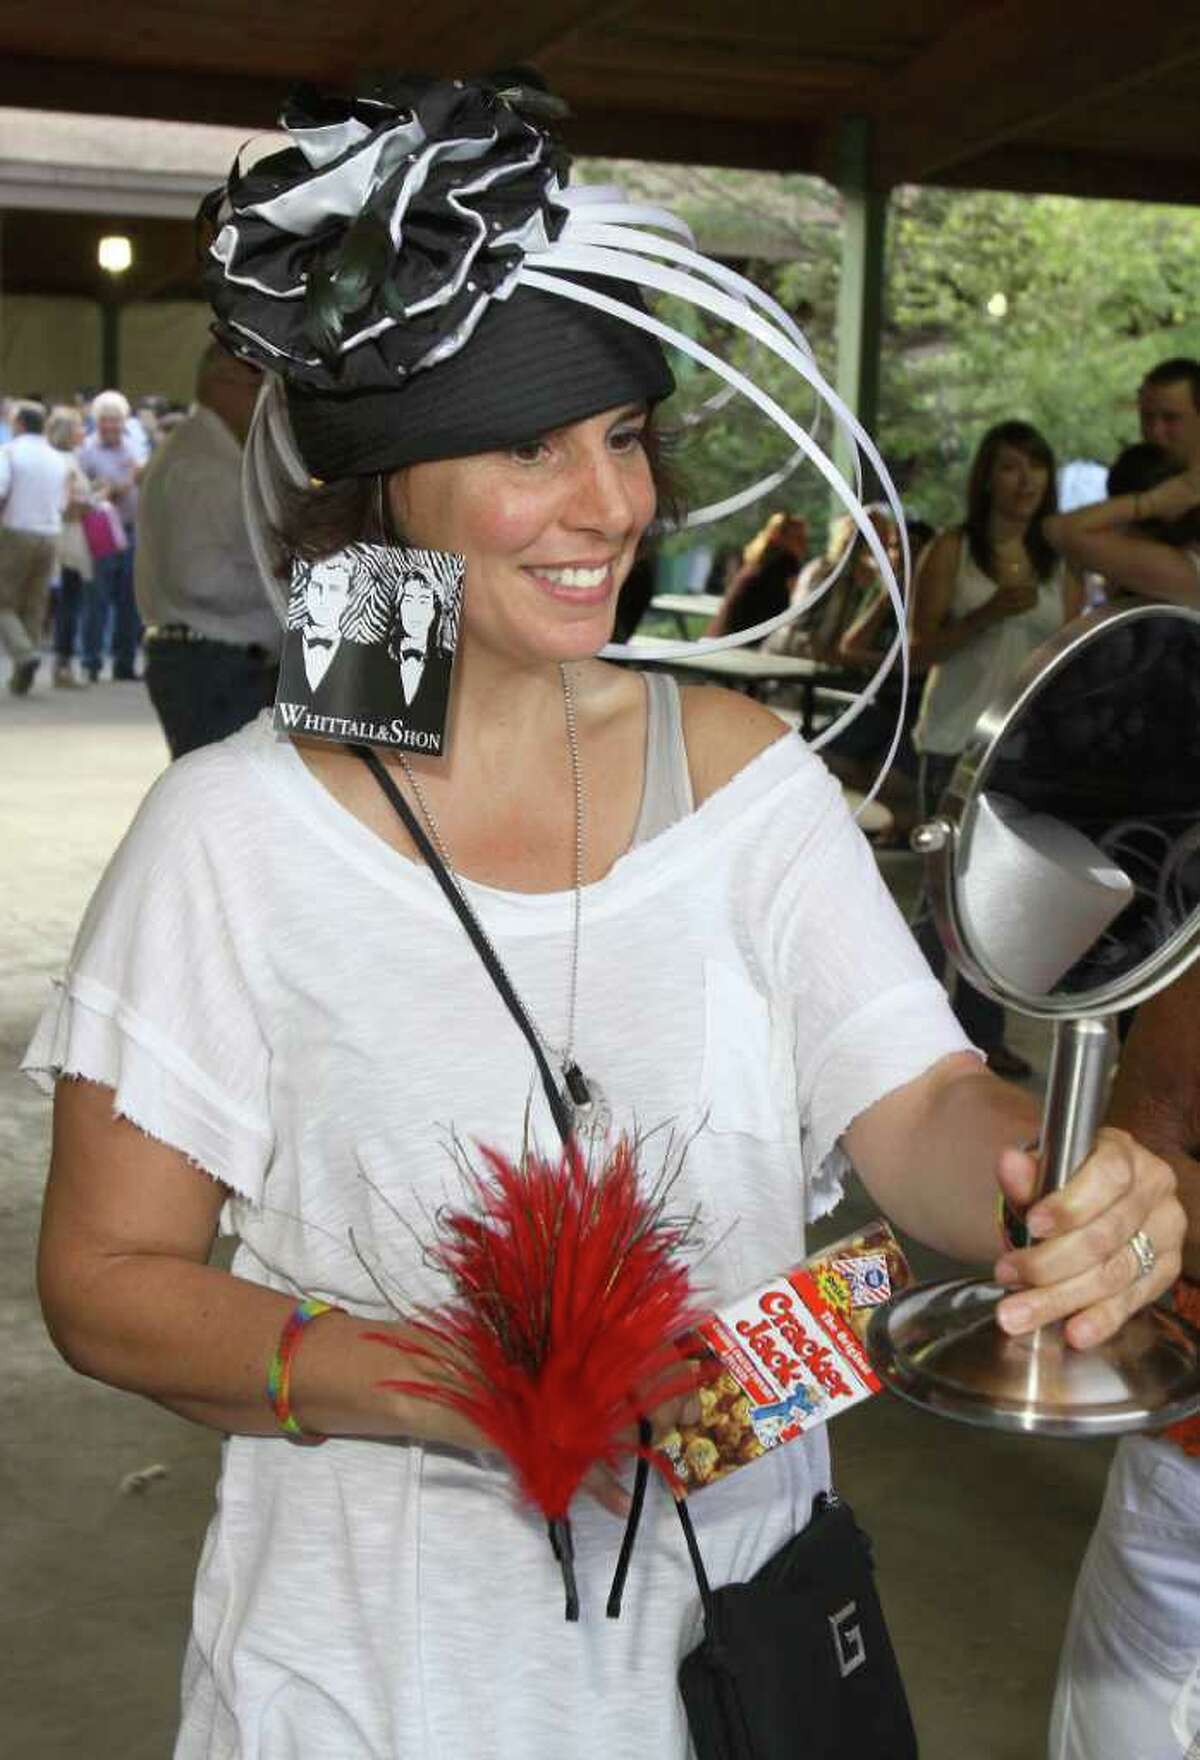 Lake George, NY - July 1, 2011 - (Photo by Joe Putrock/Special to the Times Union) - Lisa Theuer tries on a Whittall&Shon hat from the Frivolous Boutique table during the Double H Ranch 20th Anniversary Gala.